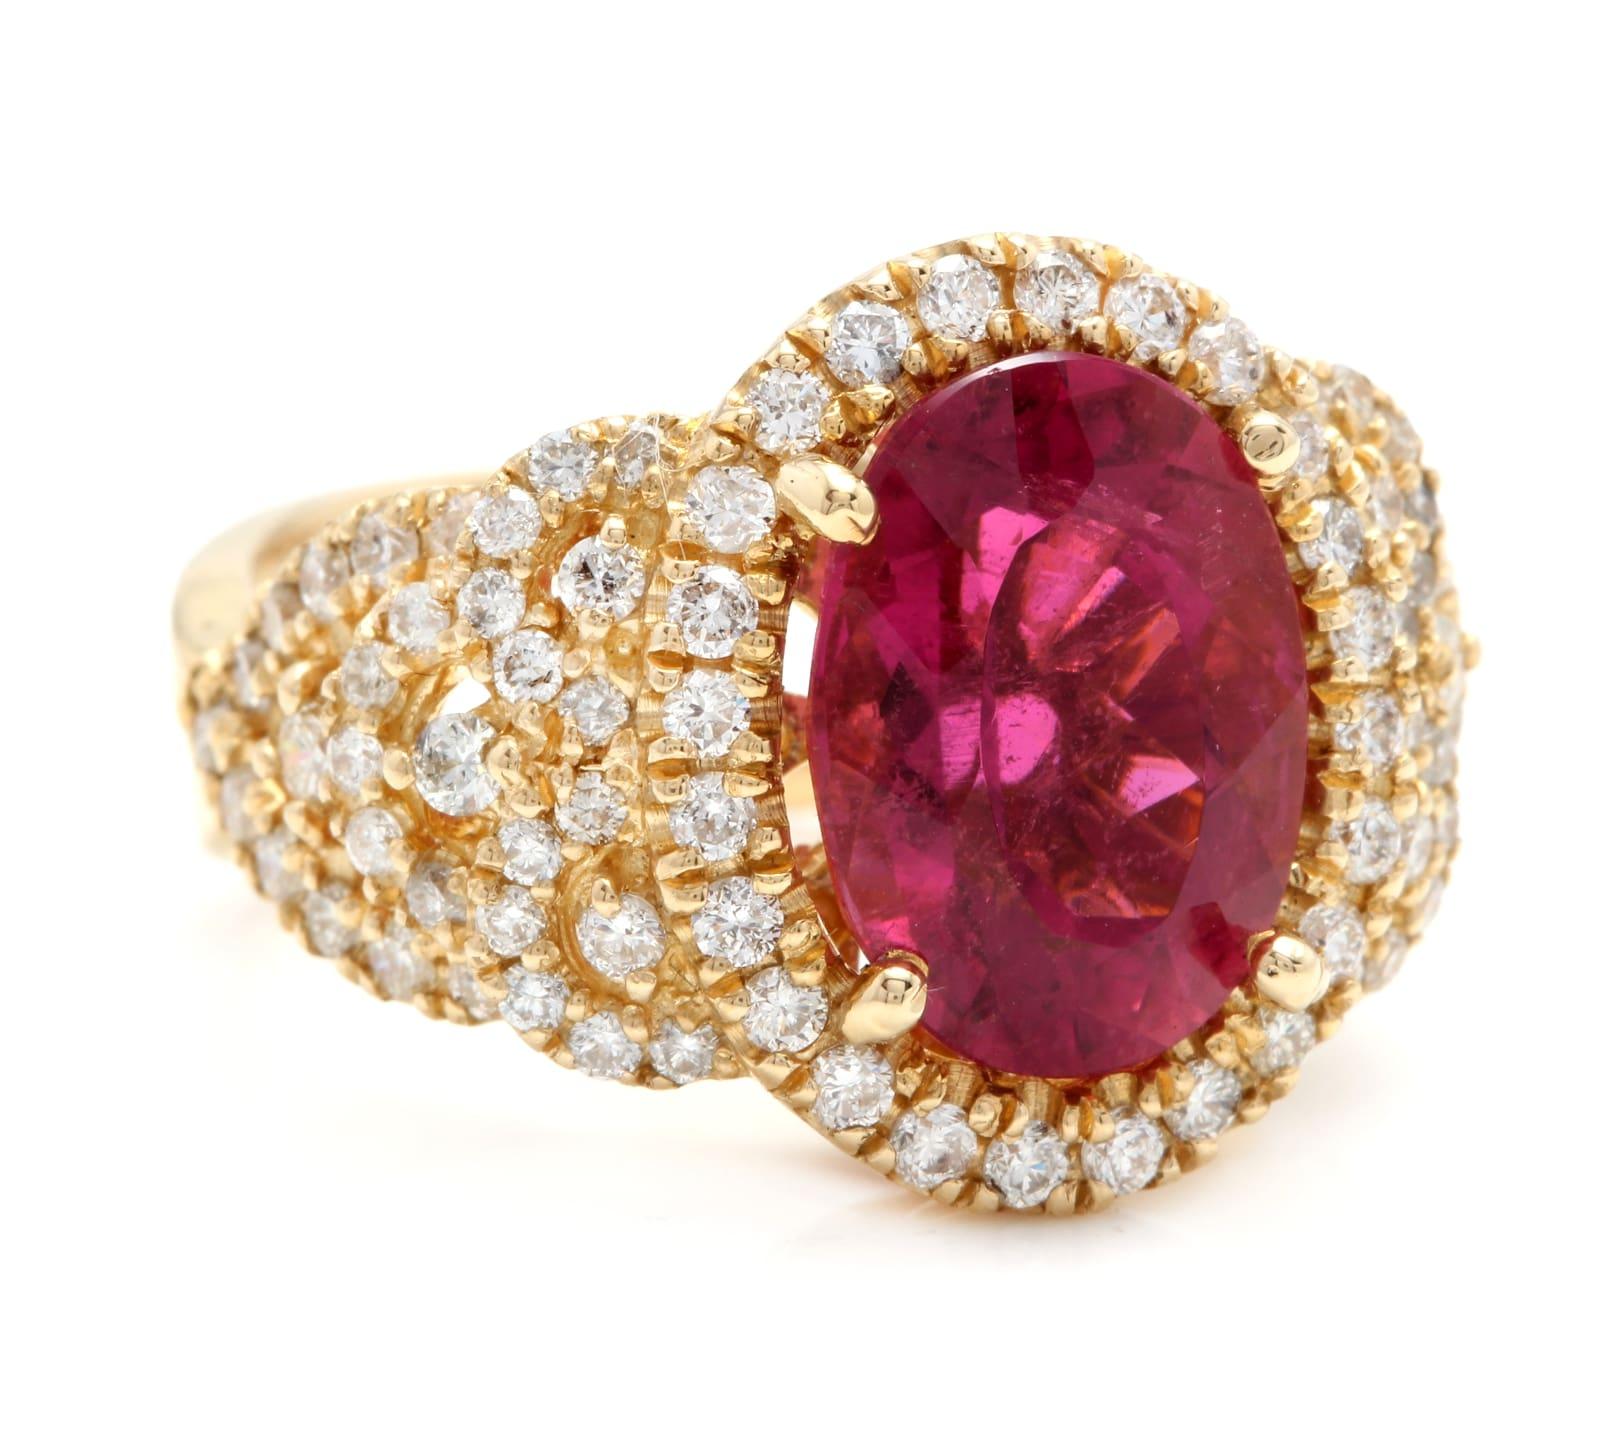 6.50 Carats Impressive Natural Rubellite and Diamond 14K Yellow Gold Ring

Total Rubellite Weight is Approx. 5.00 Carats

Rubellite Measures: Approx. 12.00 x 9.00mm

Natural Round Diamonds Weight: Approx. 1.50 Carats (color H / Clarity